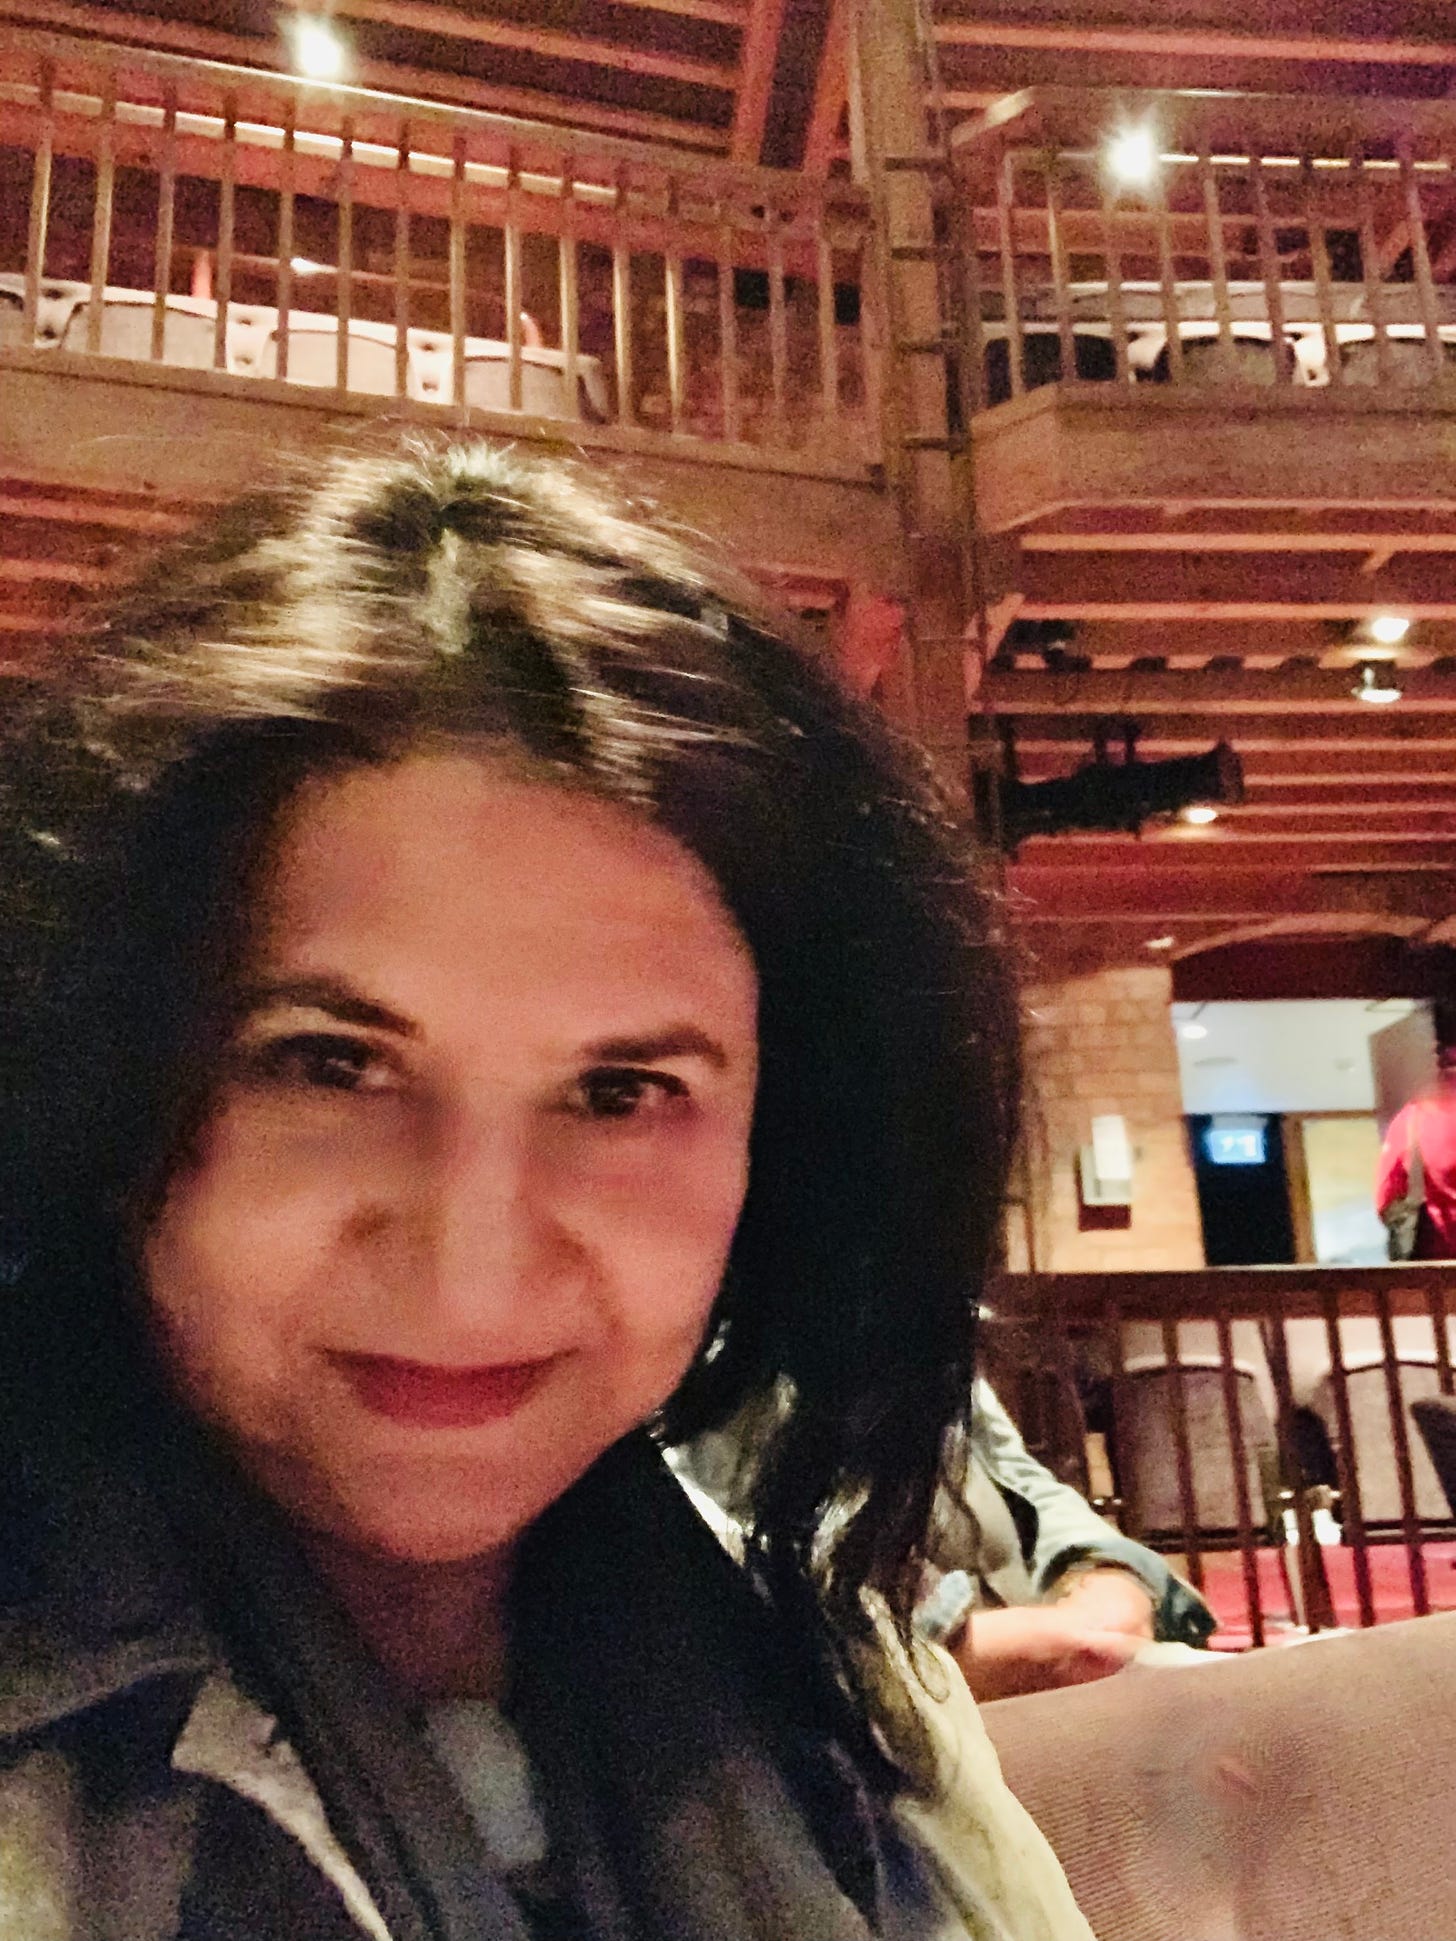 Photo of the author, Bianca Bagatourian, at the Royal Shakespeare Theatre in Stratford-upon-Avon